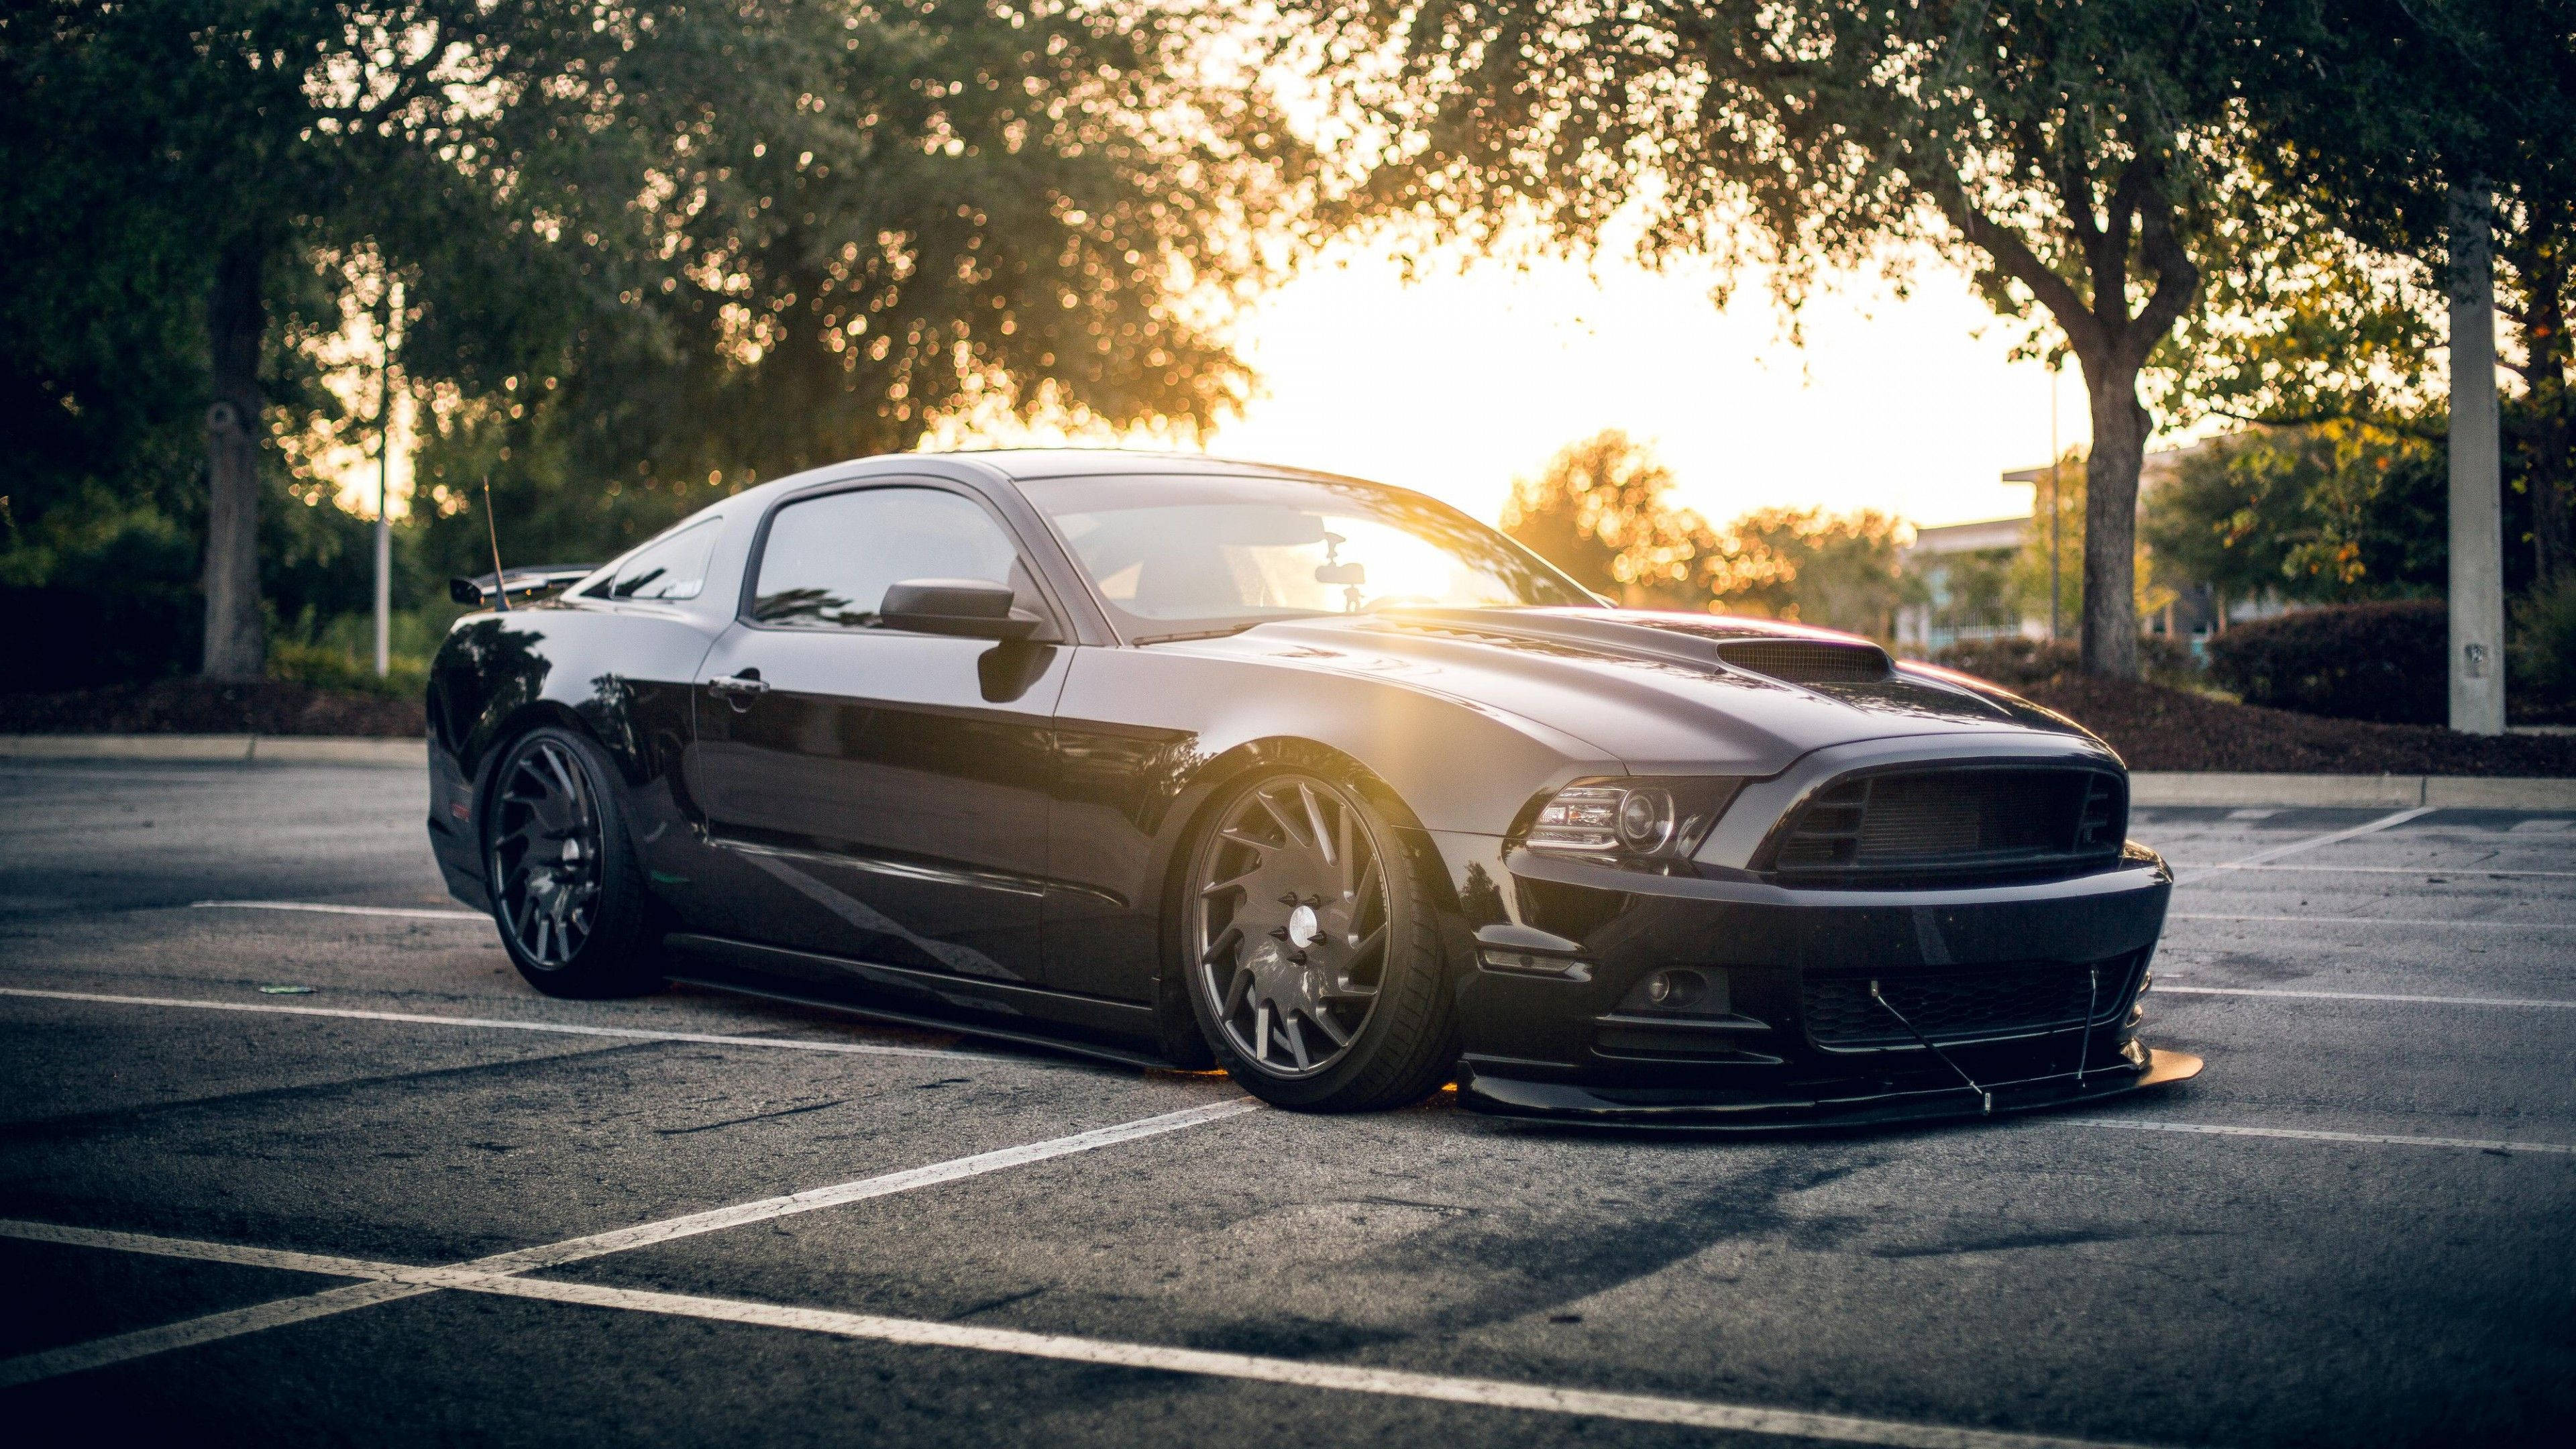 Download 4k Ultra Hd Mustang Black Ford Shelby Gt500 Wallpaper | Wallpapers .com